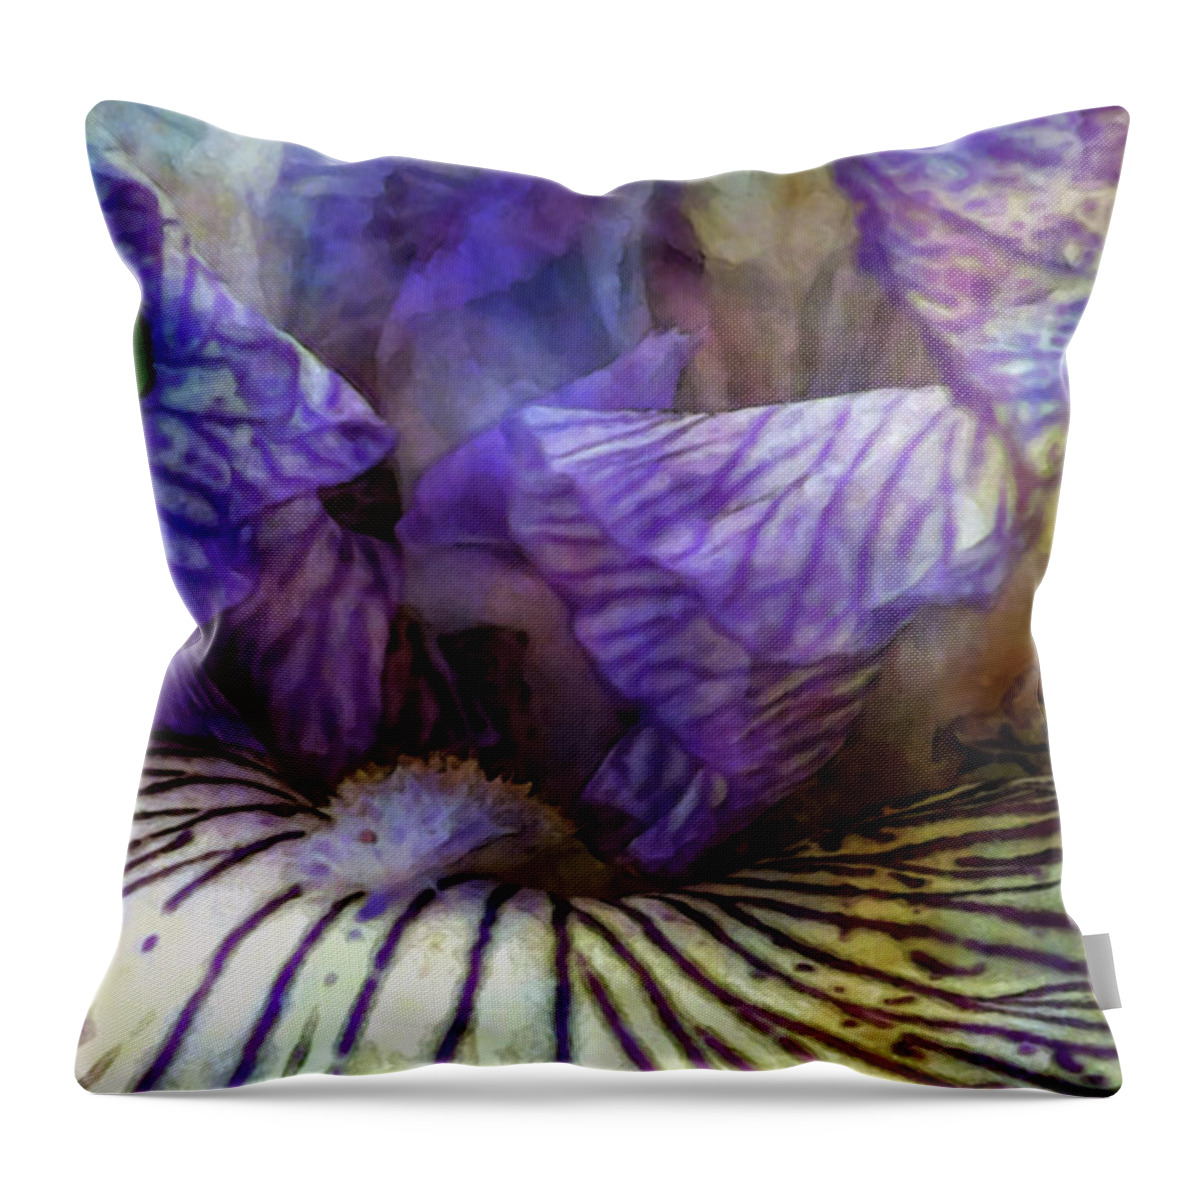 Impressionist Throw Pillow featuring the photograph Another Reality 0255 IDP_3 by Steven Ward